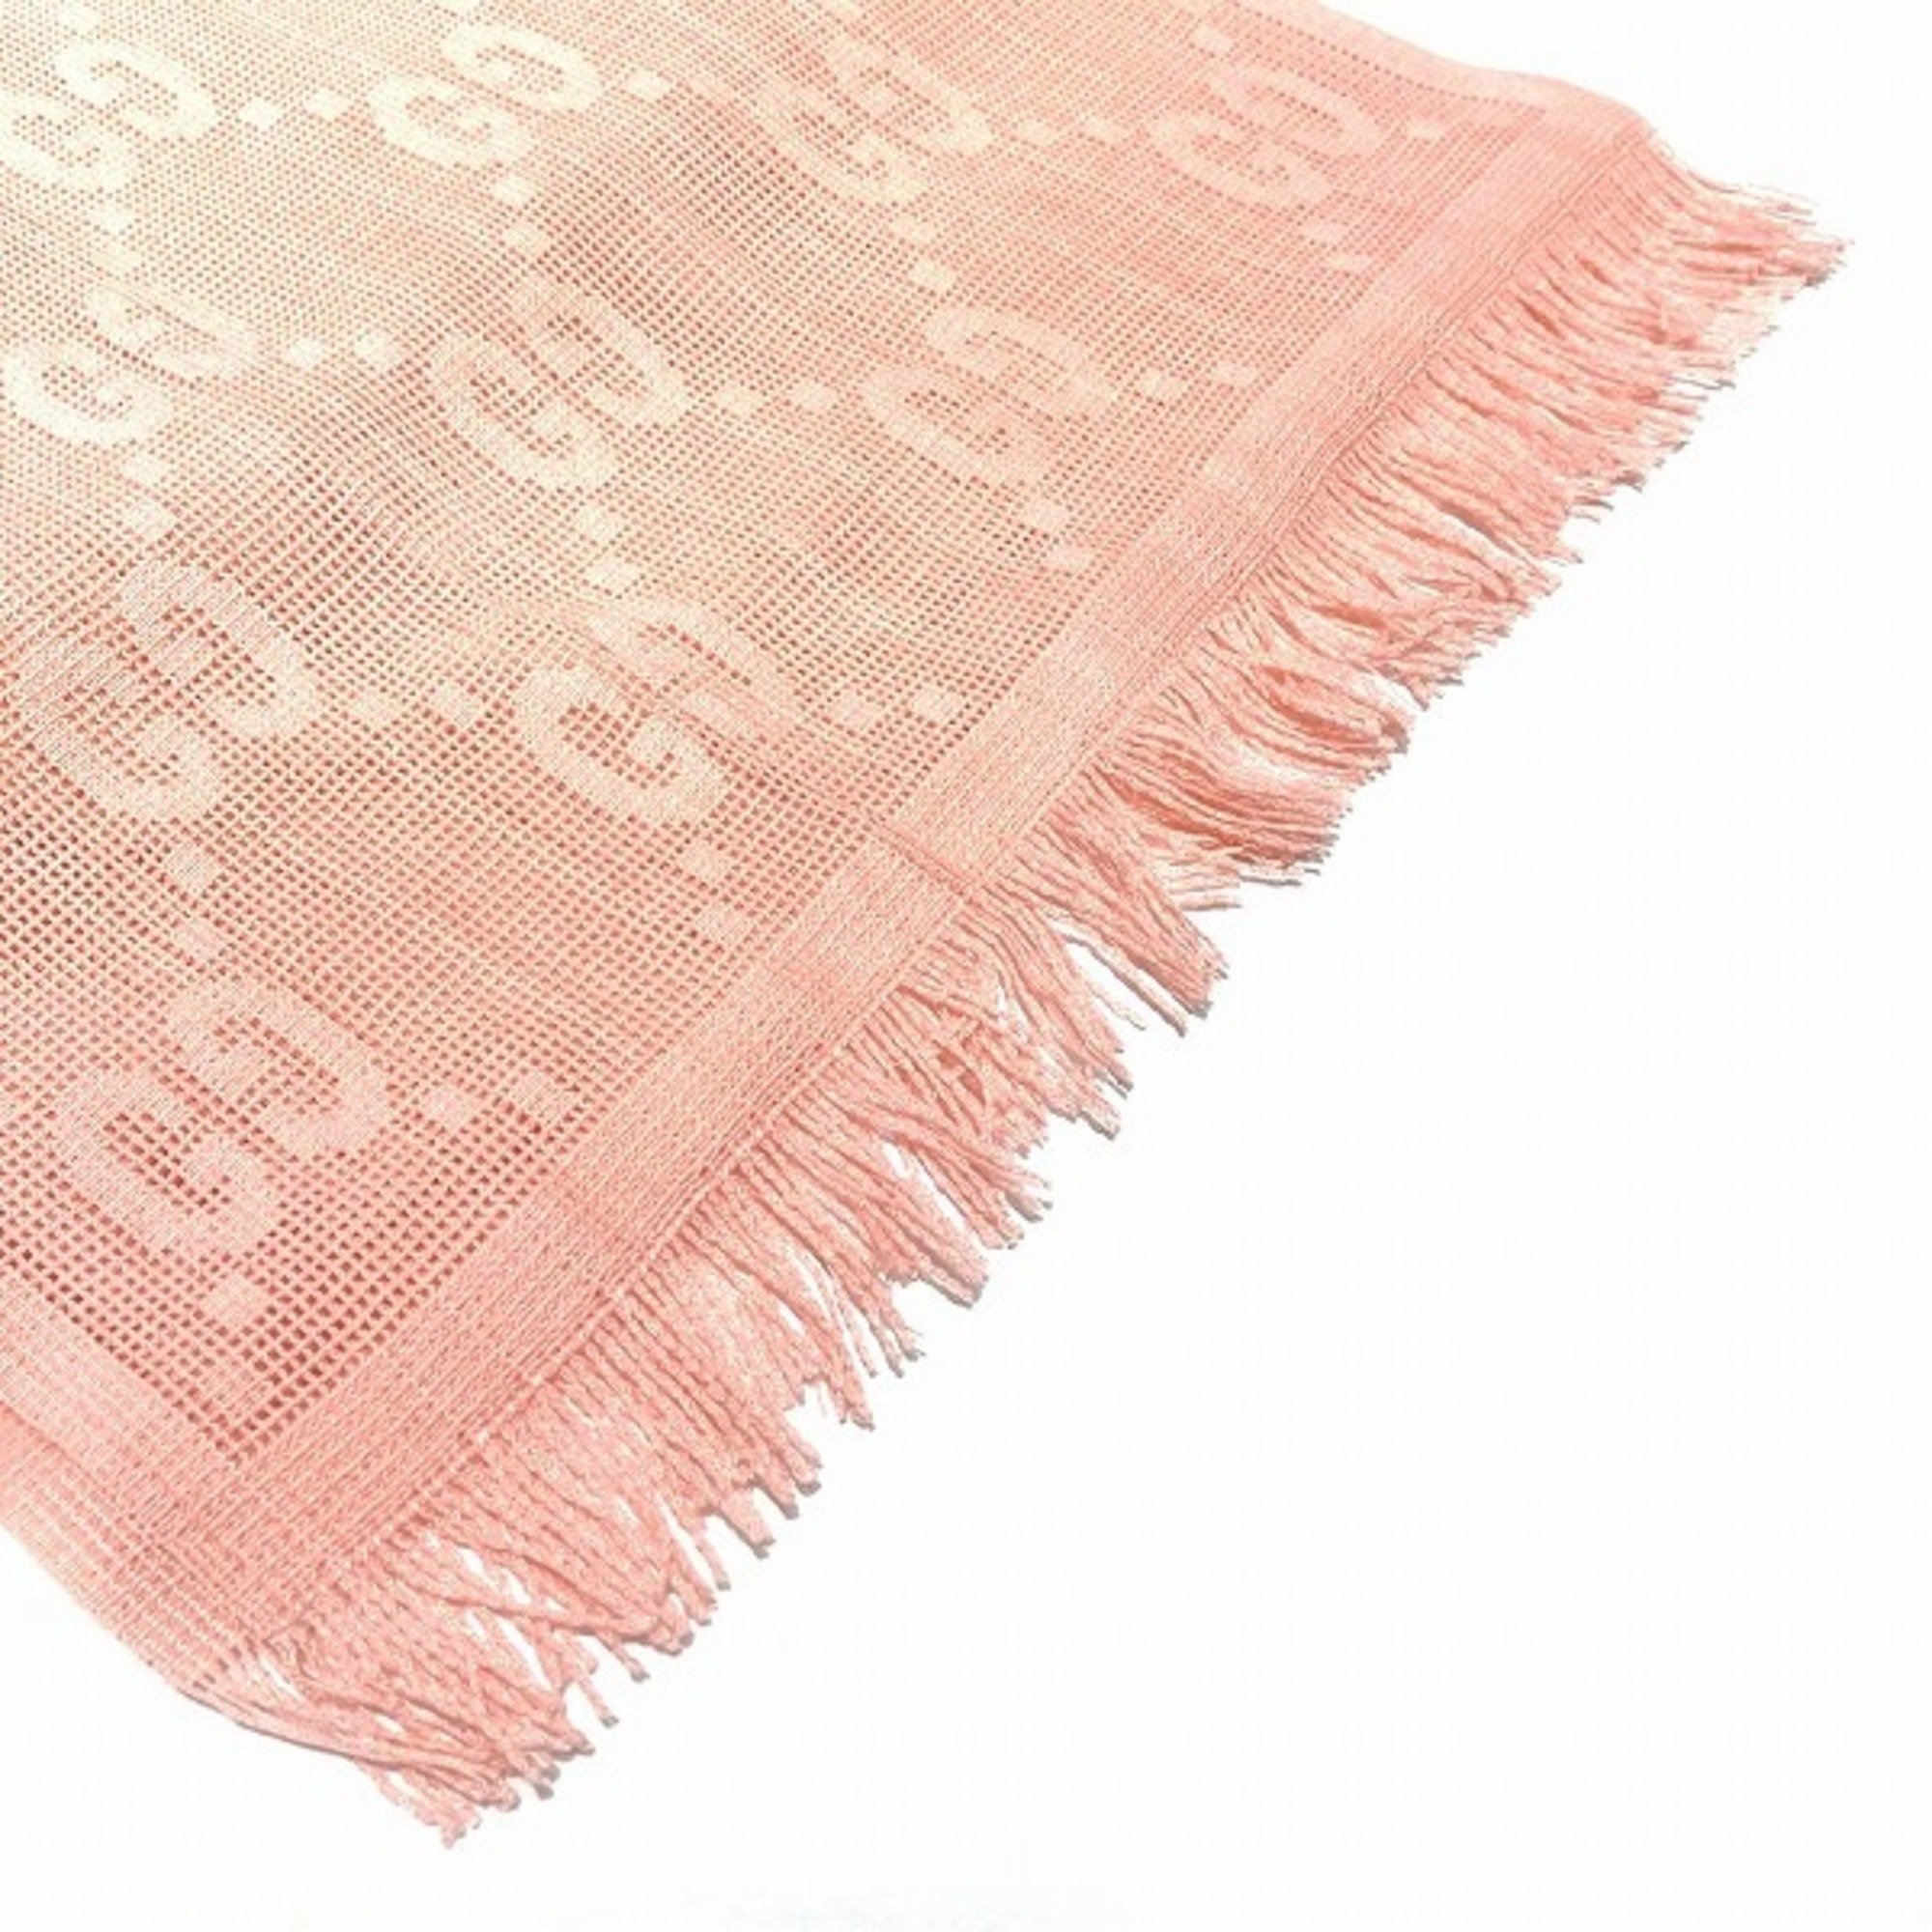 GUCCI 640680 3GG01 5800 Accessories Scarves for Women